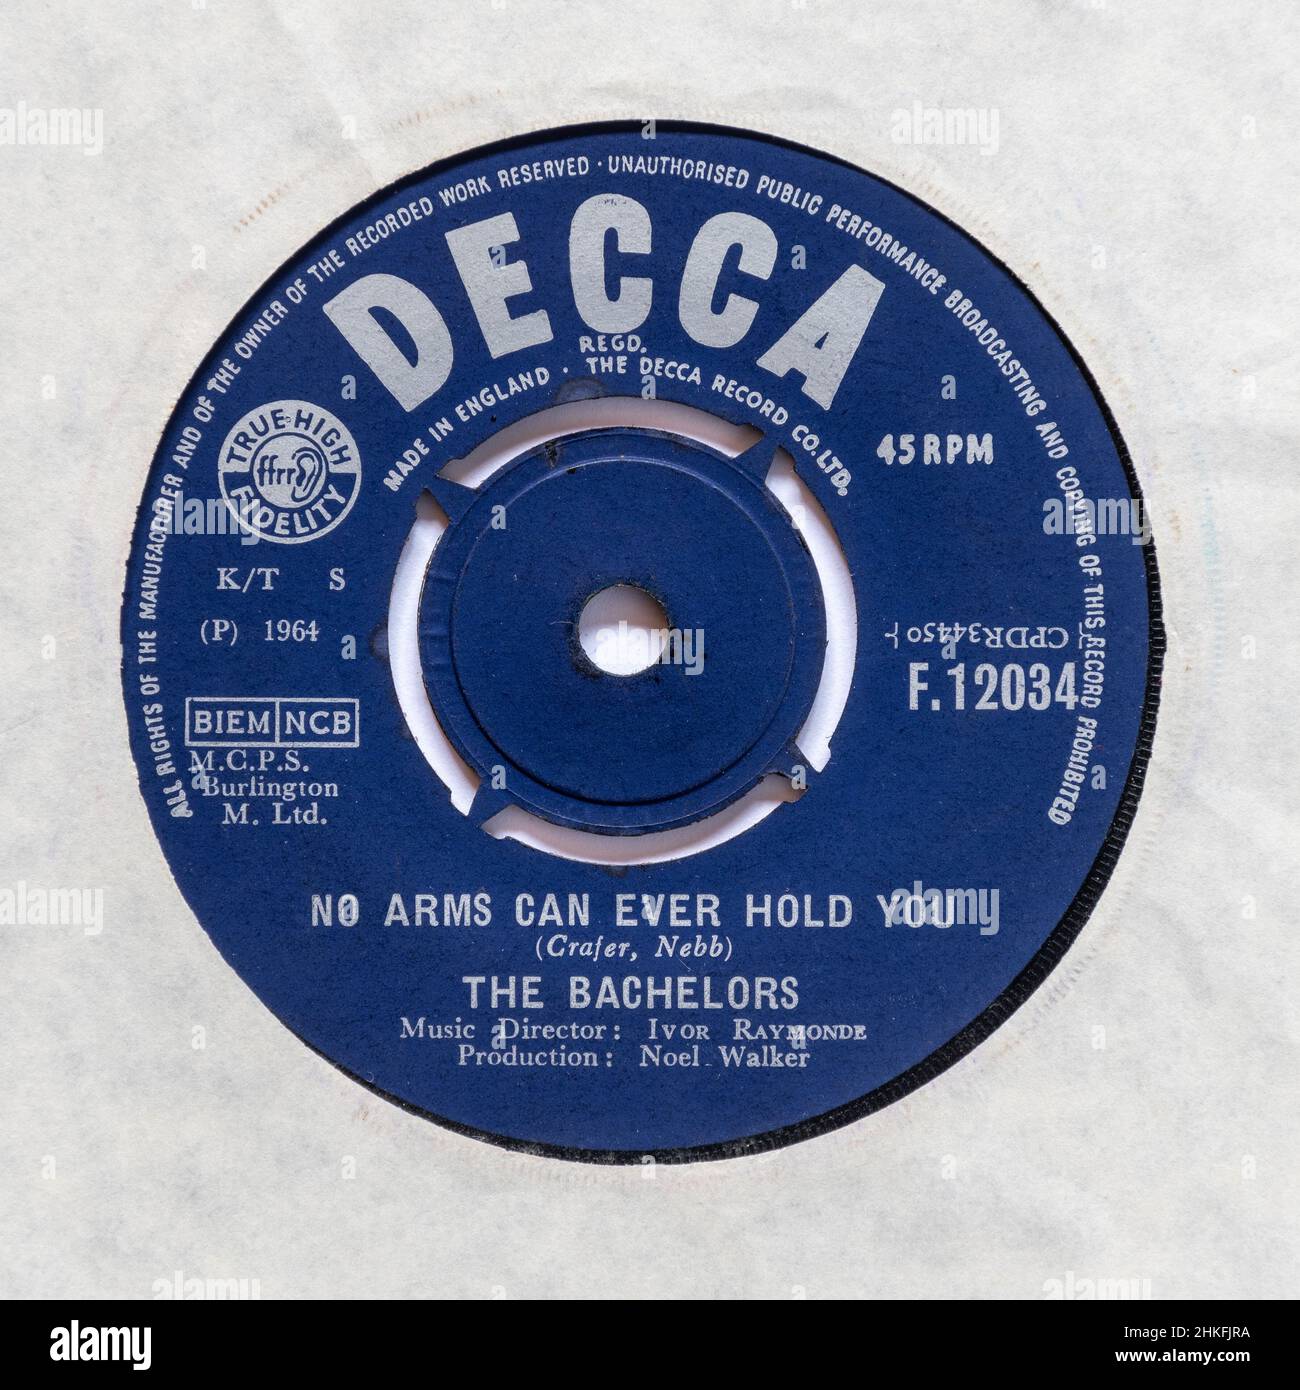 No arms can ever hold you, by The Bachelors, a stock photo of the 7' single vinyl 45 rpm record Stock Photo